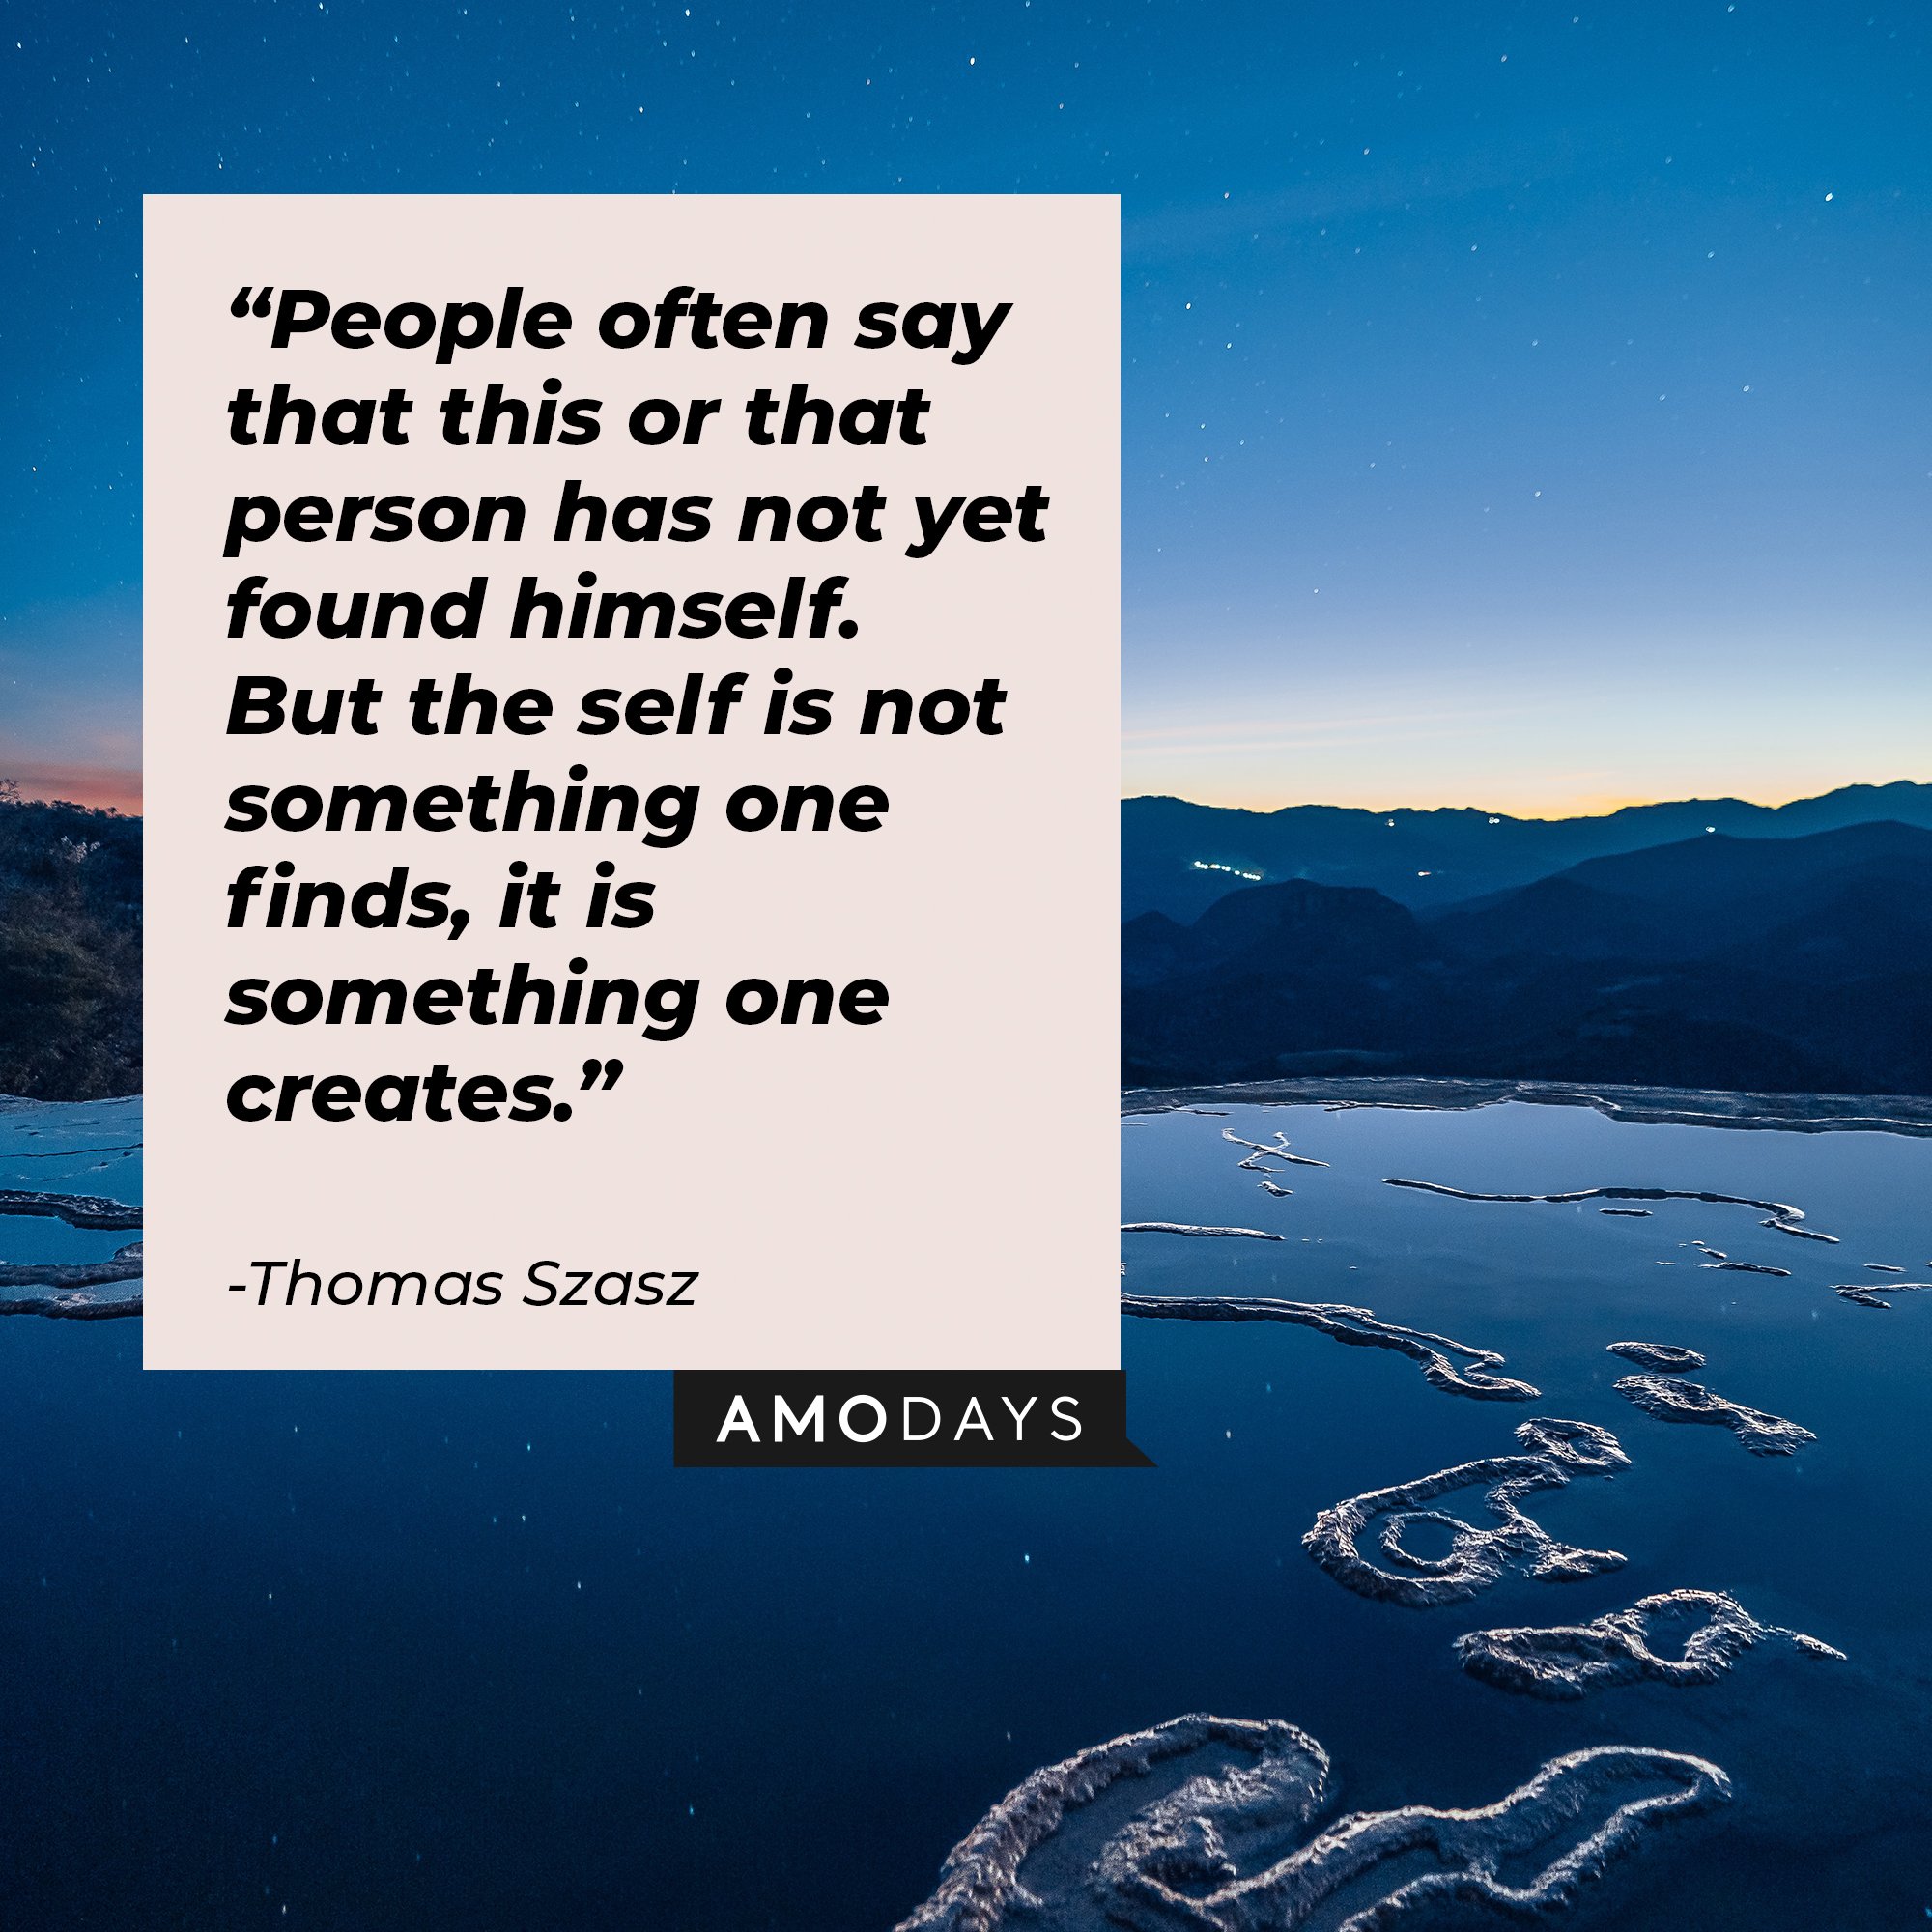 Thomas Szasz's quote: “People often say that this or that person has not yet found himself. But the self is not something one finds, it is something one creates.”  | Image: AmoDays